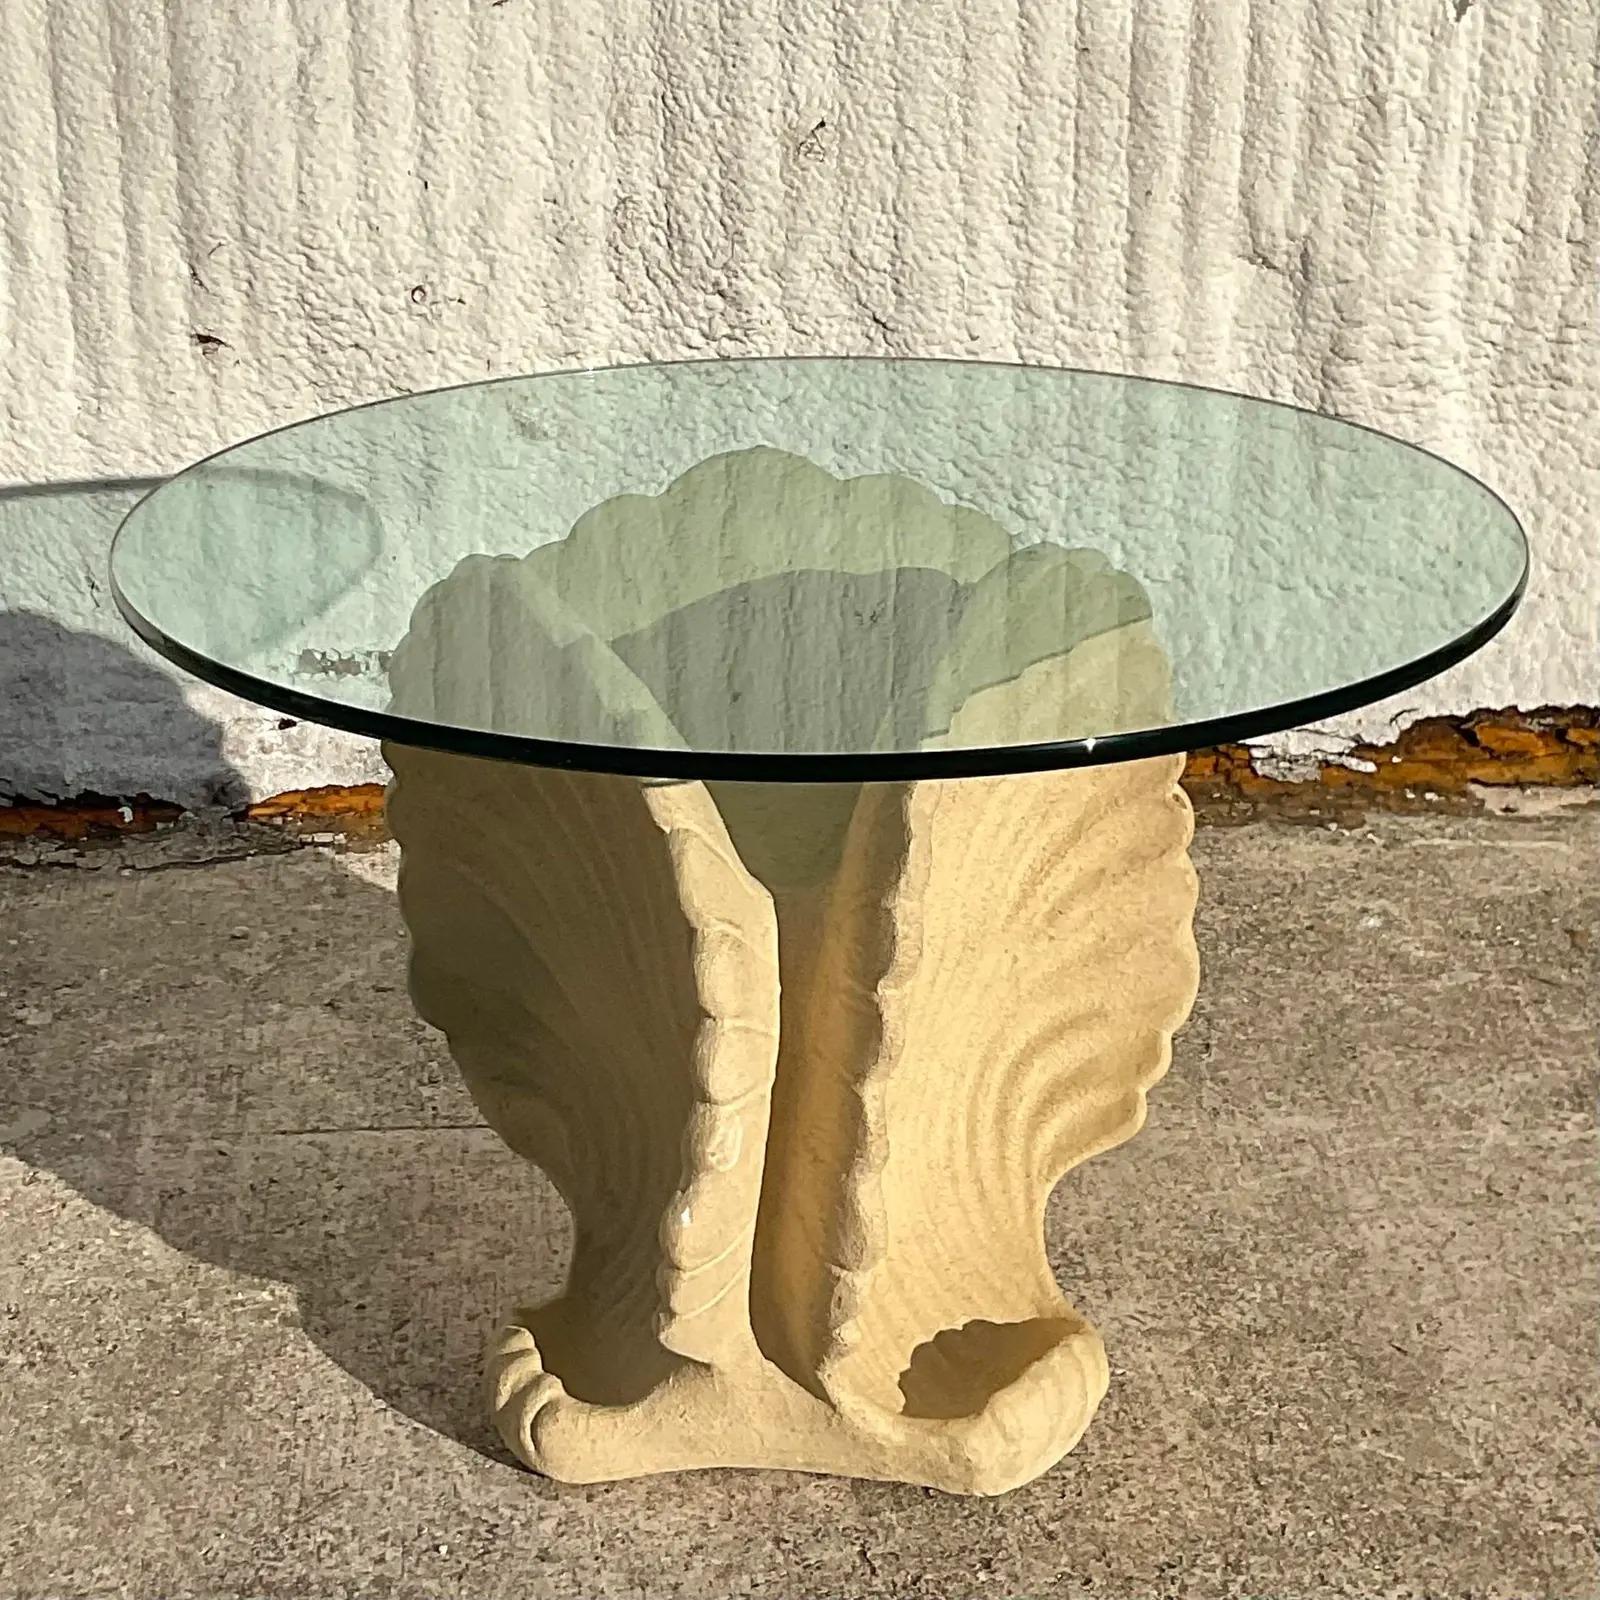 North American Vintage Coastal Plaster Clamshell Table For Sale